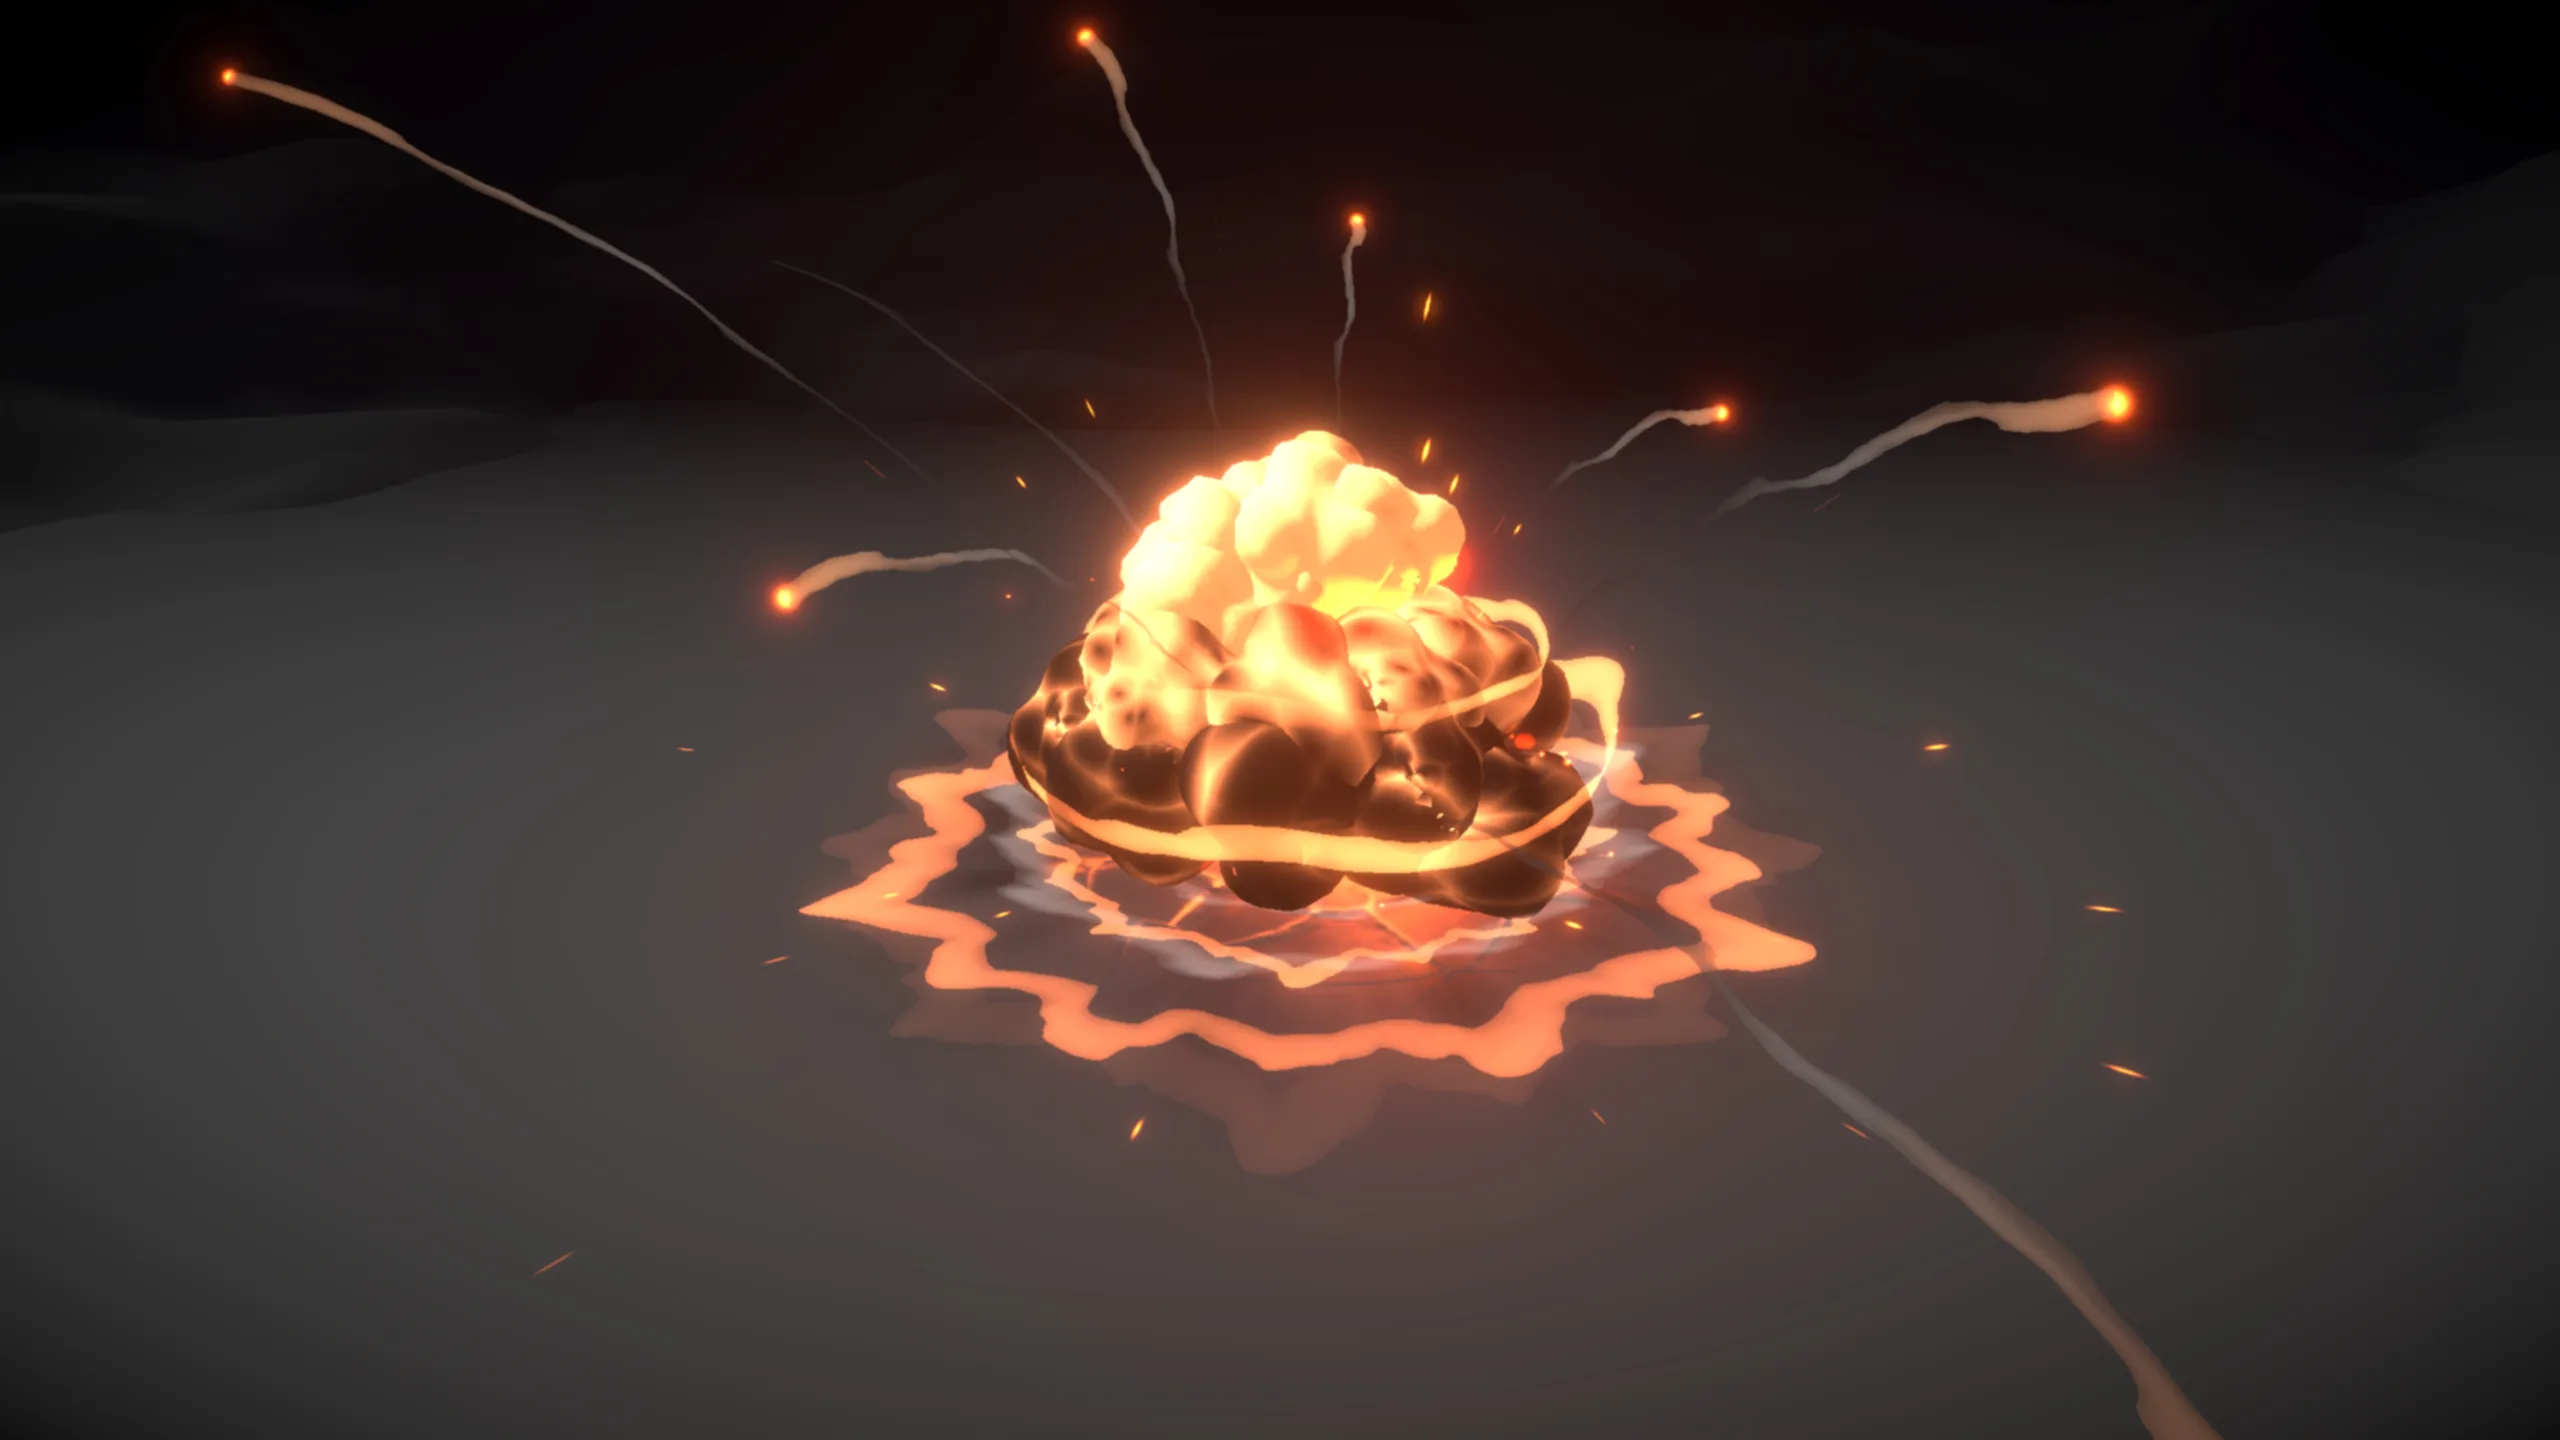 Visual Effects for Games in Unity - Stylized Explosion